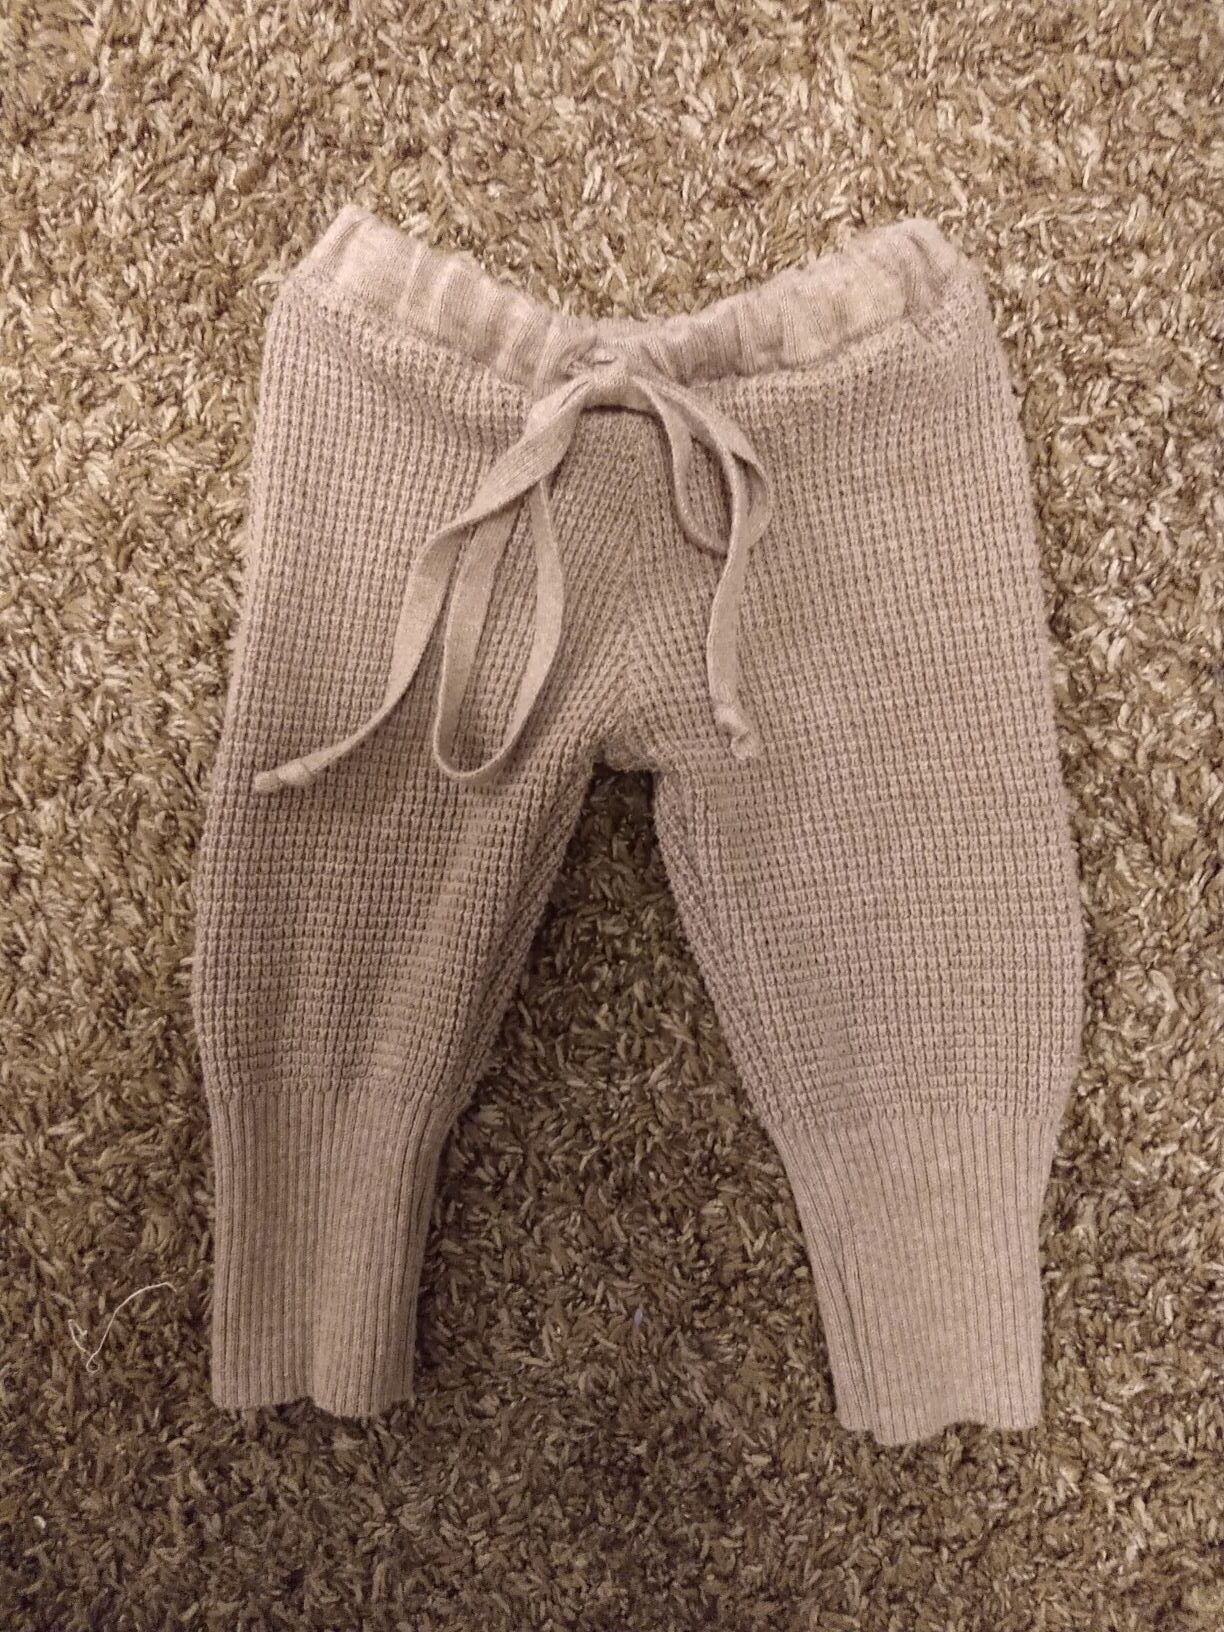 DIY Baby Pants from an Upcycled Jacket - Oui Chéri Lifestyle